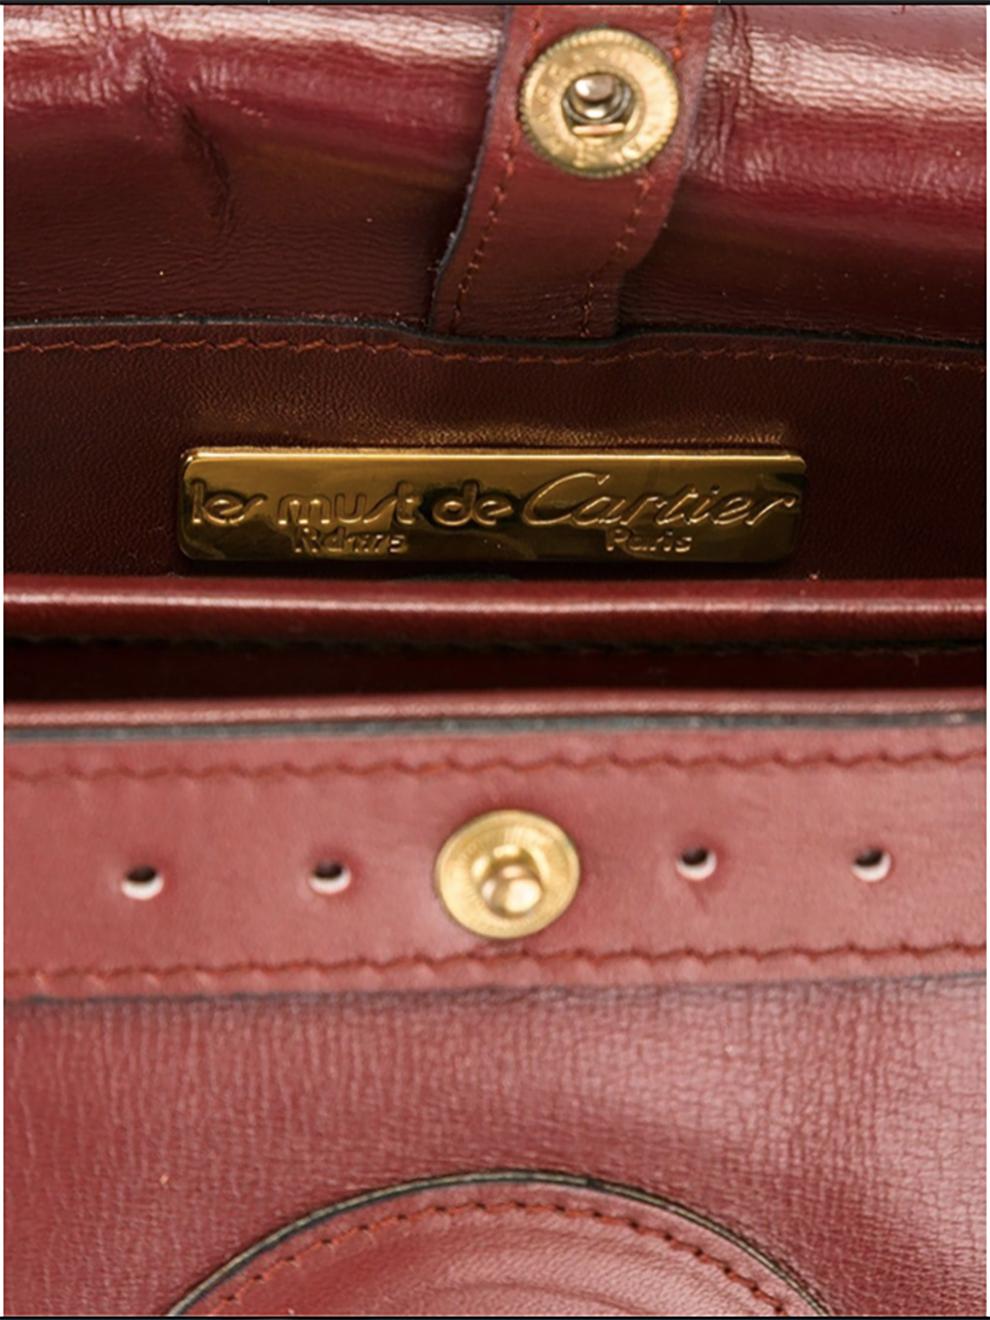 Cartier bordeaux suede and leather shoulder bag featuring gold-tone hardware and two inside compartments, a long adjustable shoulder strap ( 38,9 in. (99cm), an inside gold tone Must de Cartier plaque.
Width 11.4in. (29cm)
Height 8.2in. (21cm)
Width